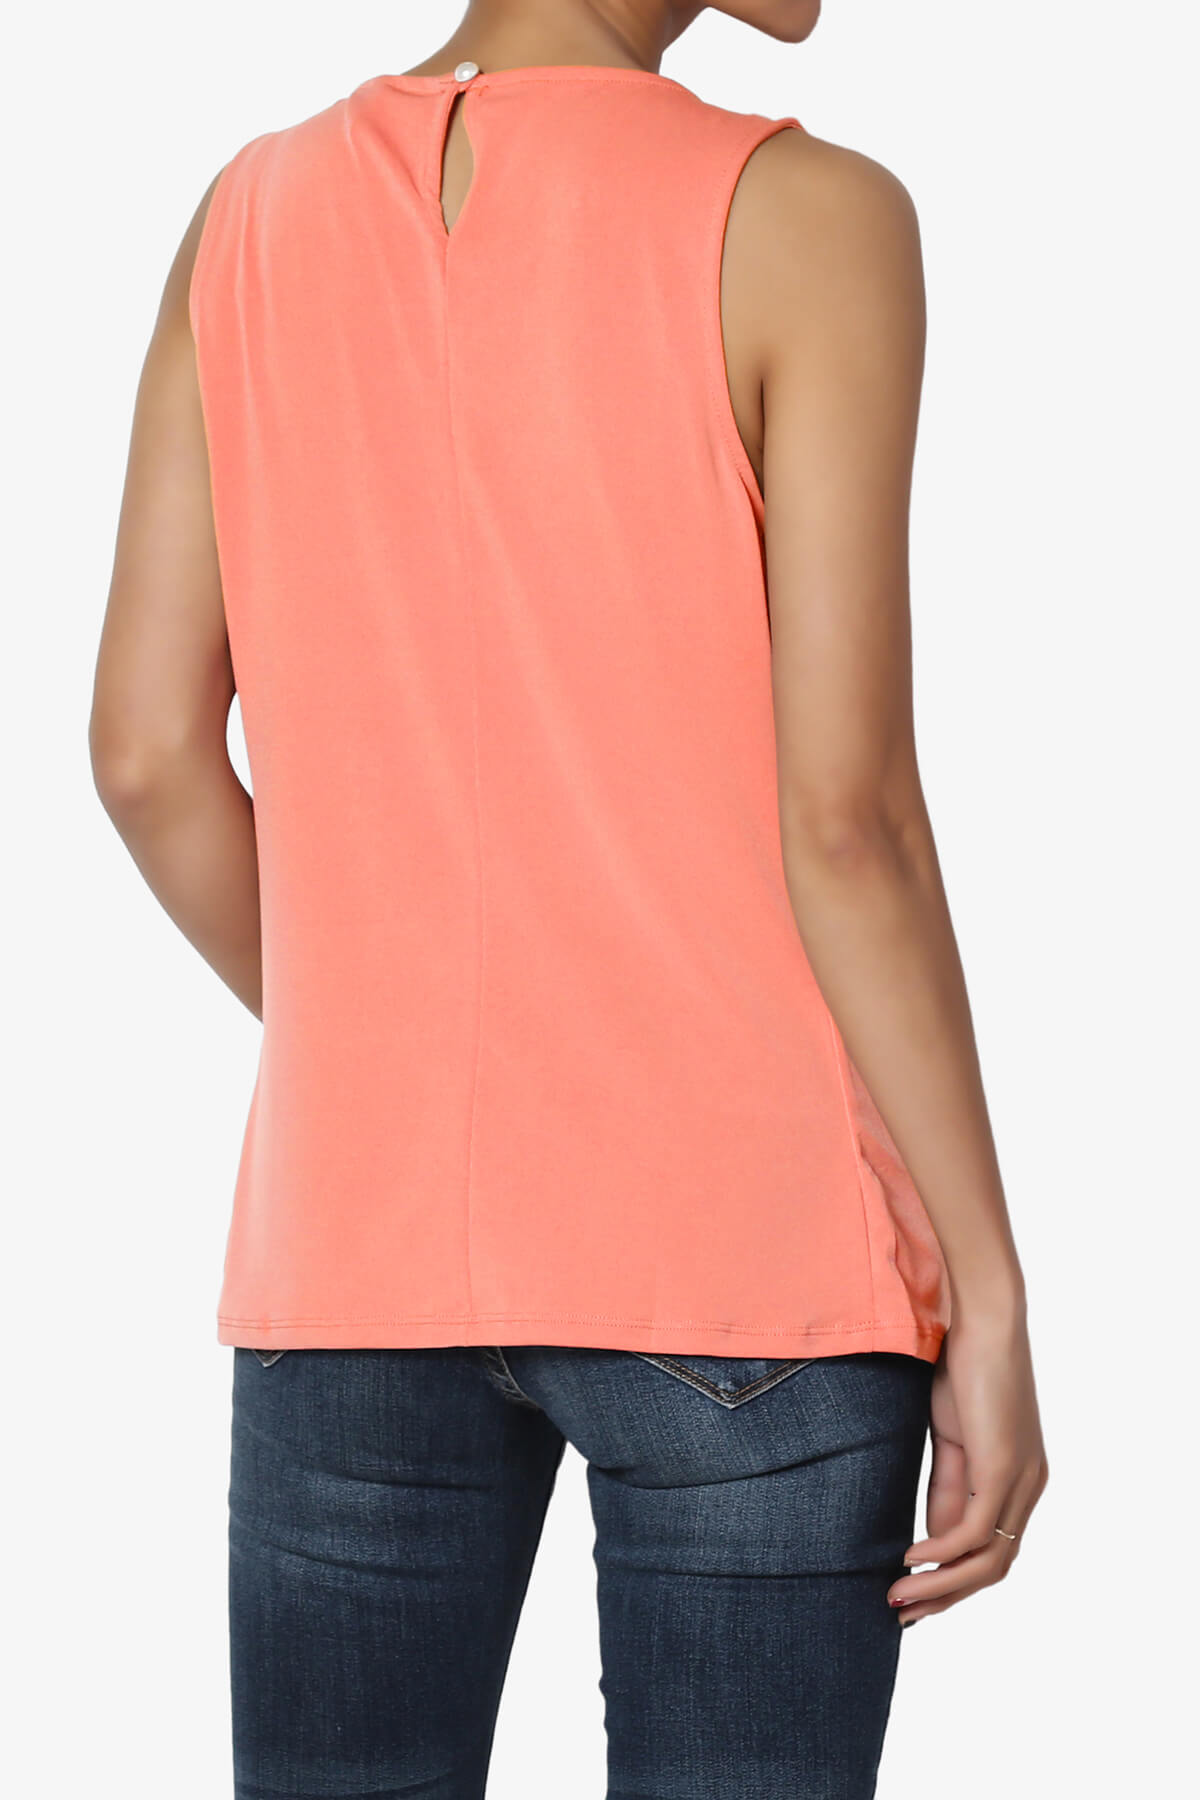 Chaffee Pleat Neck Tank Top CORAL_2